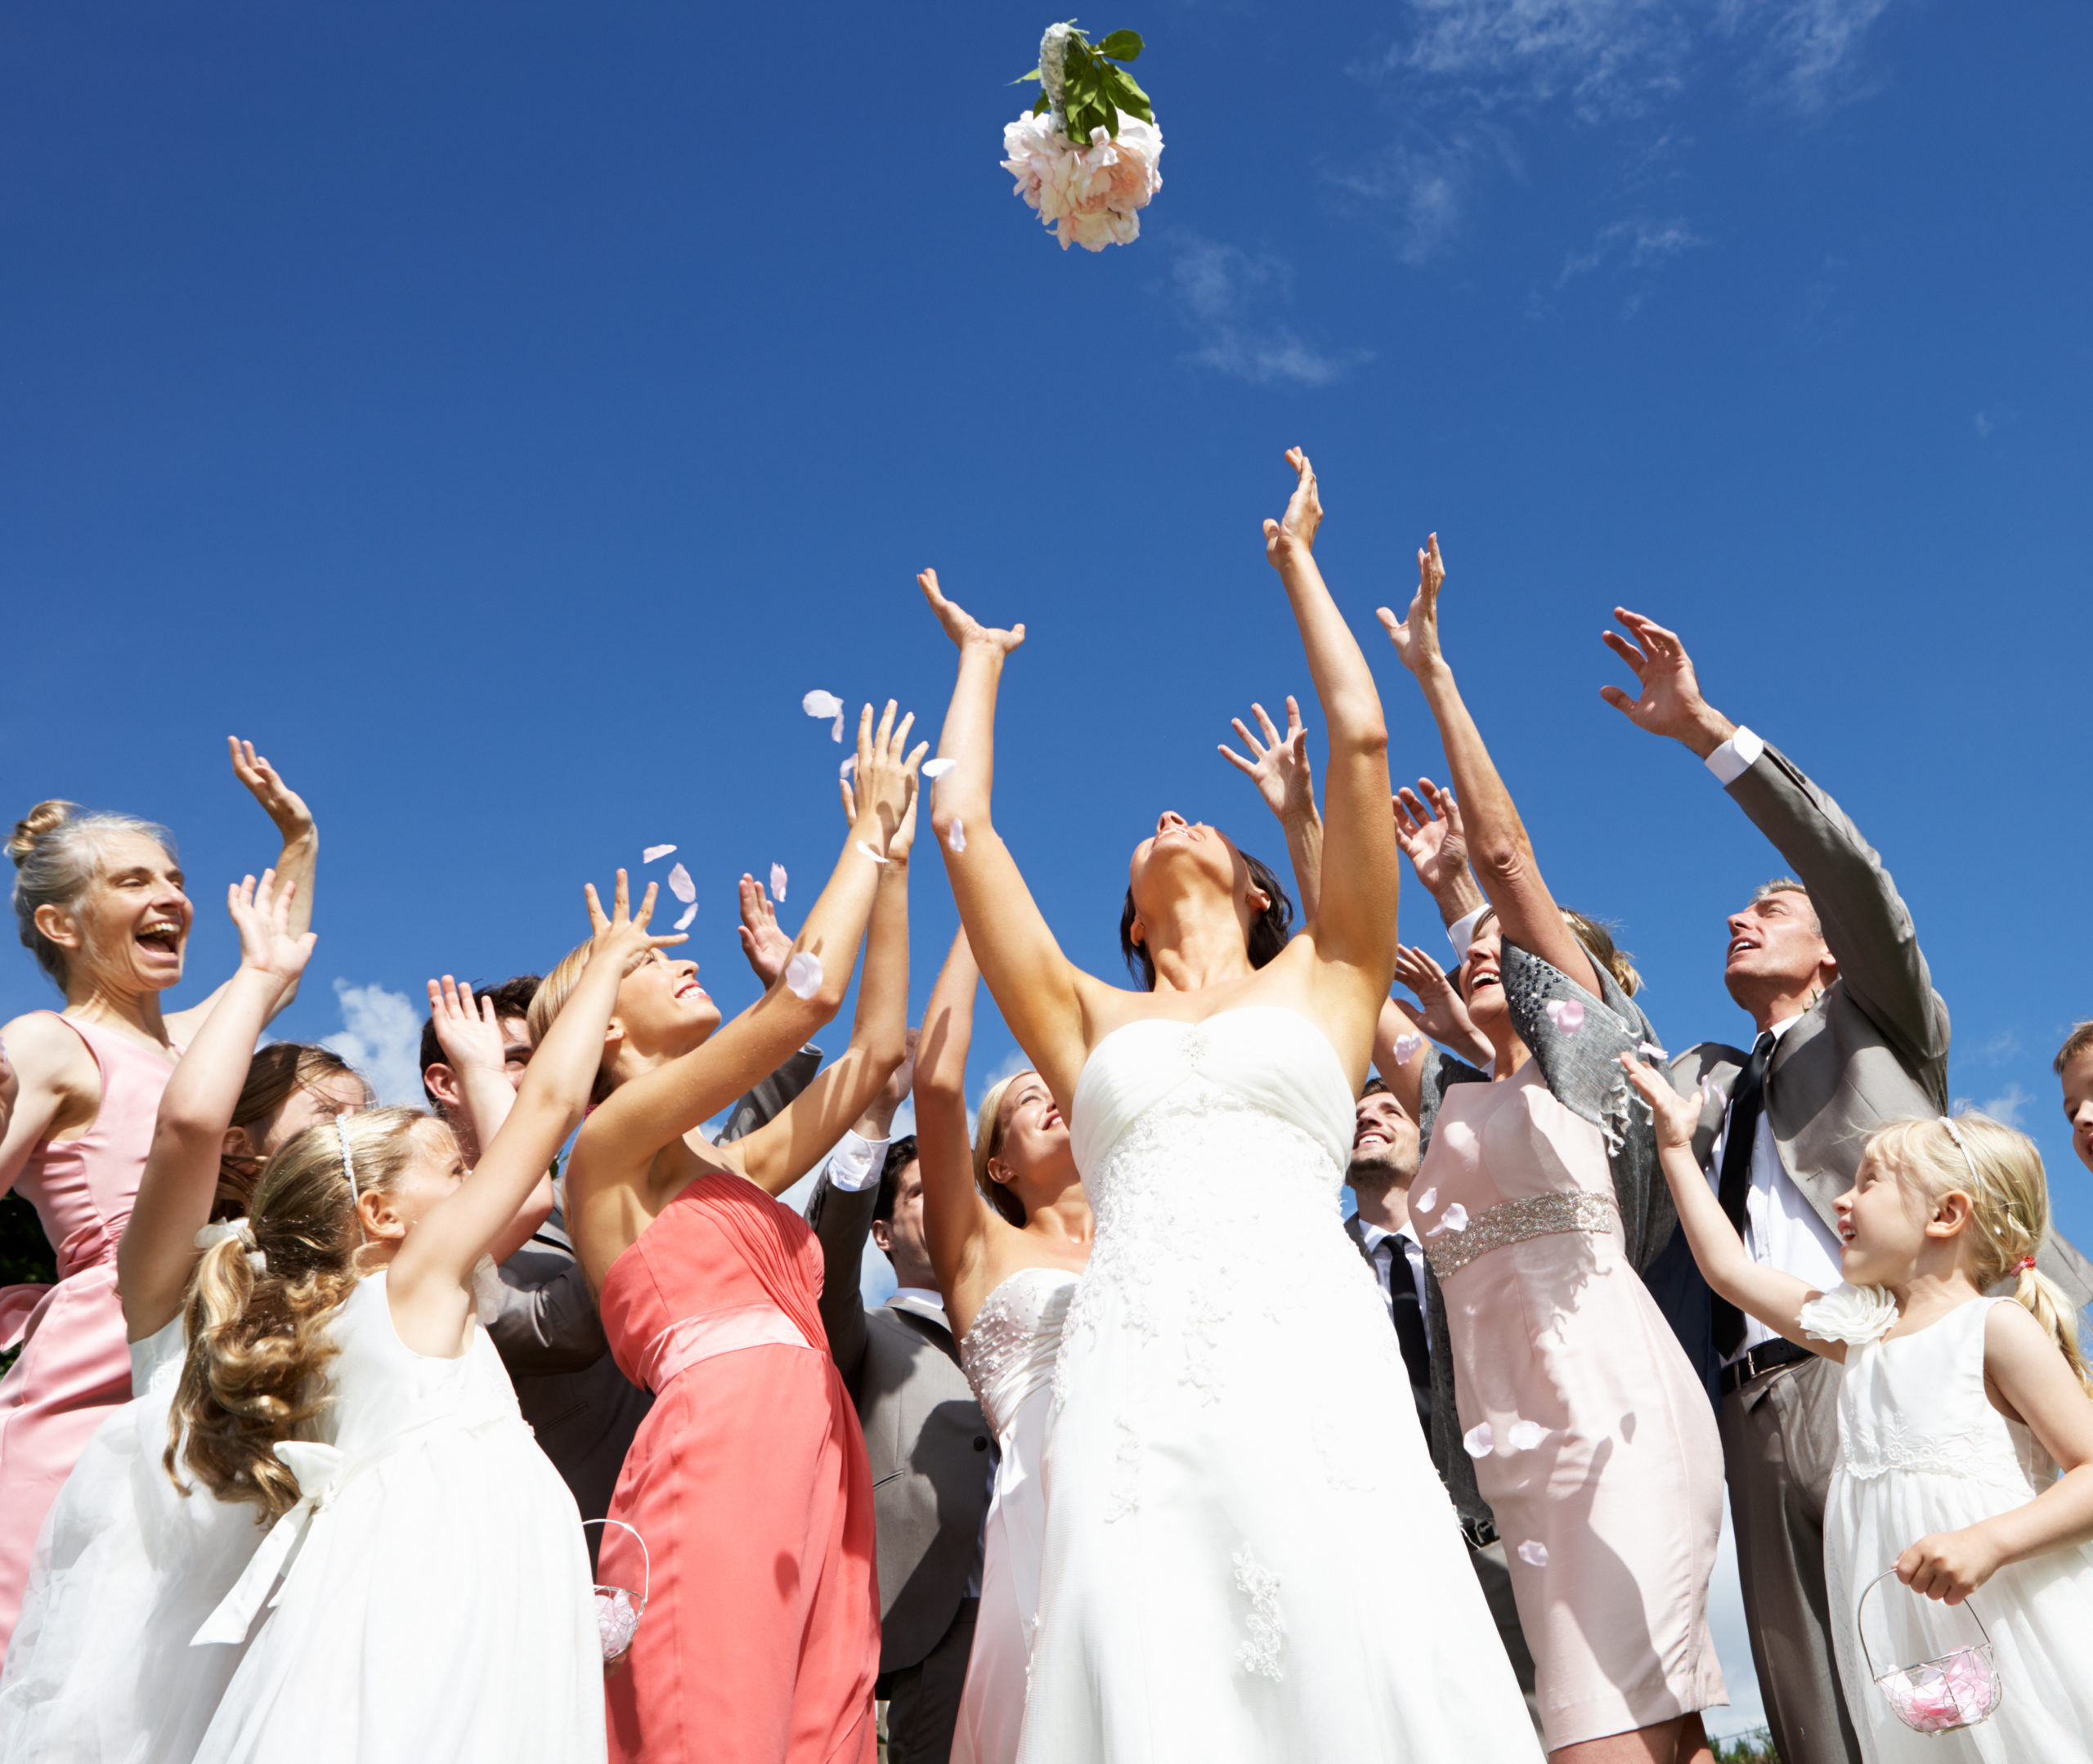 hunger Games?  One woman nearly breaks another’s arm to pick up the bouquet